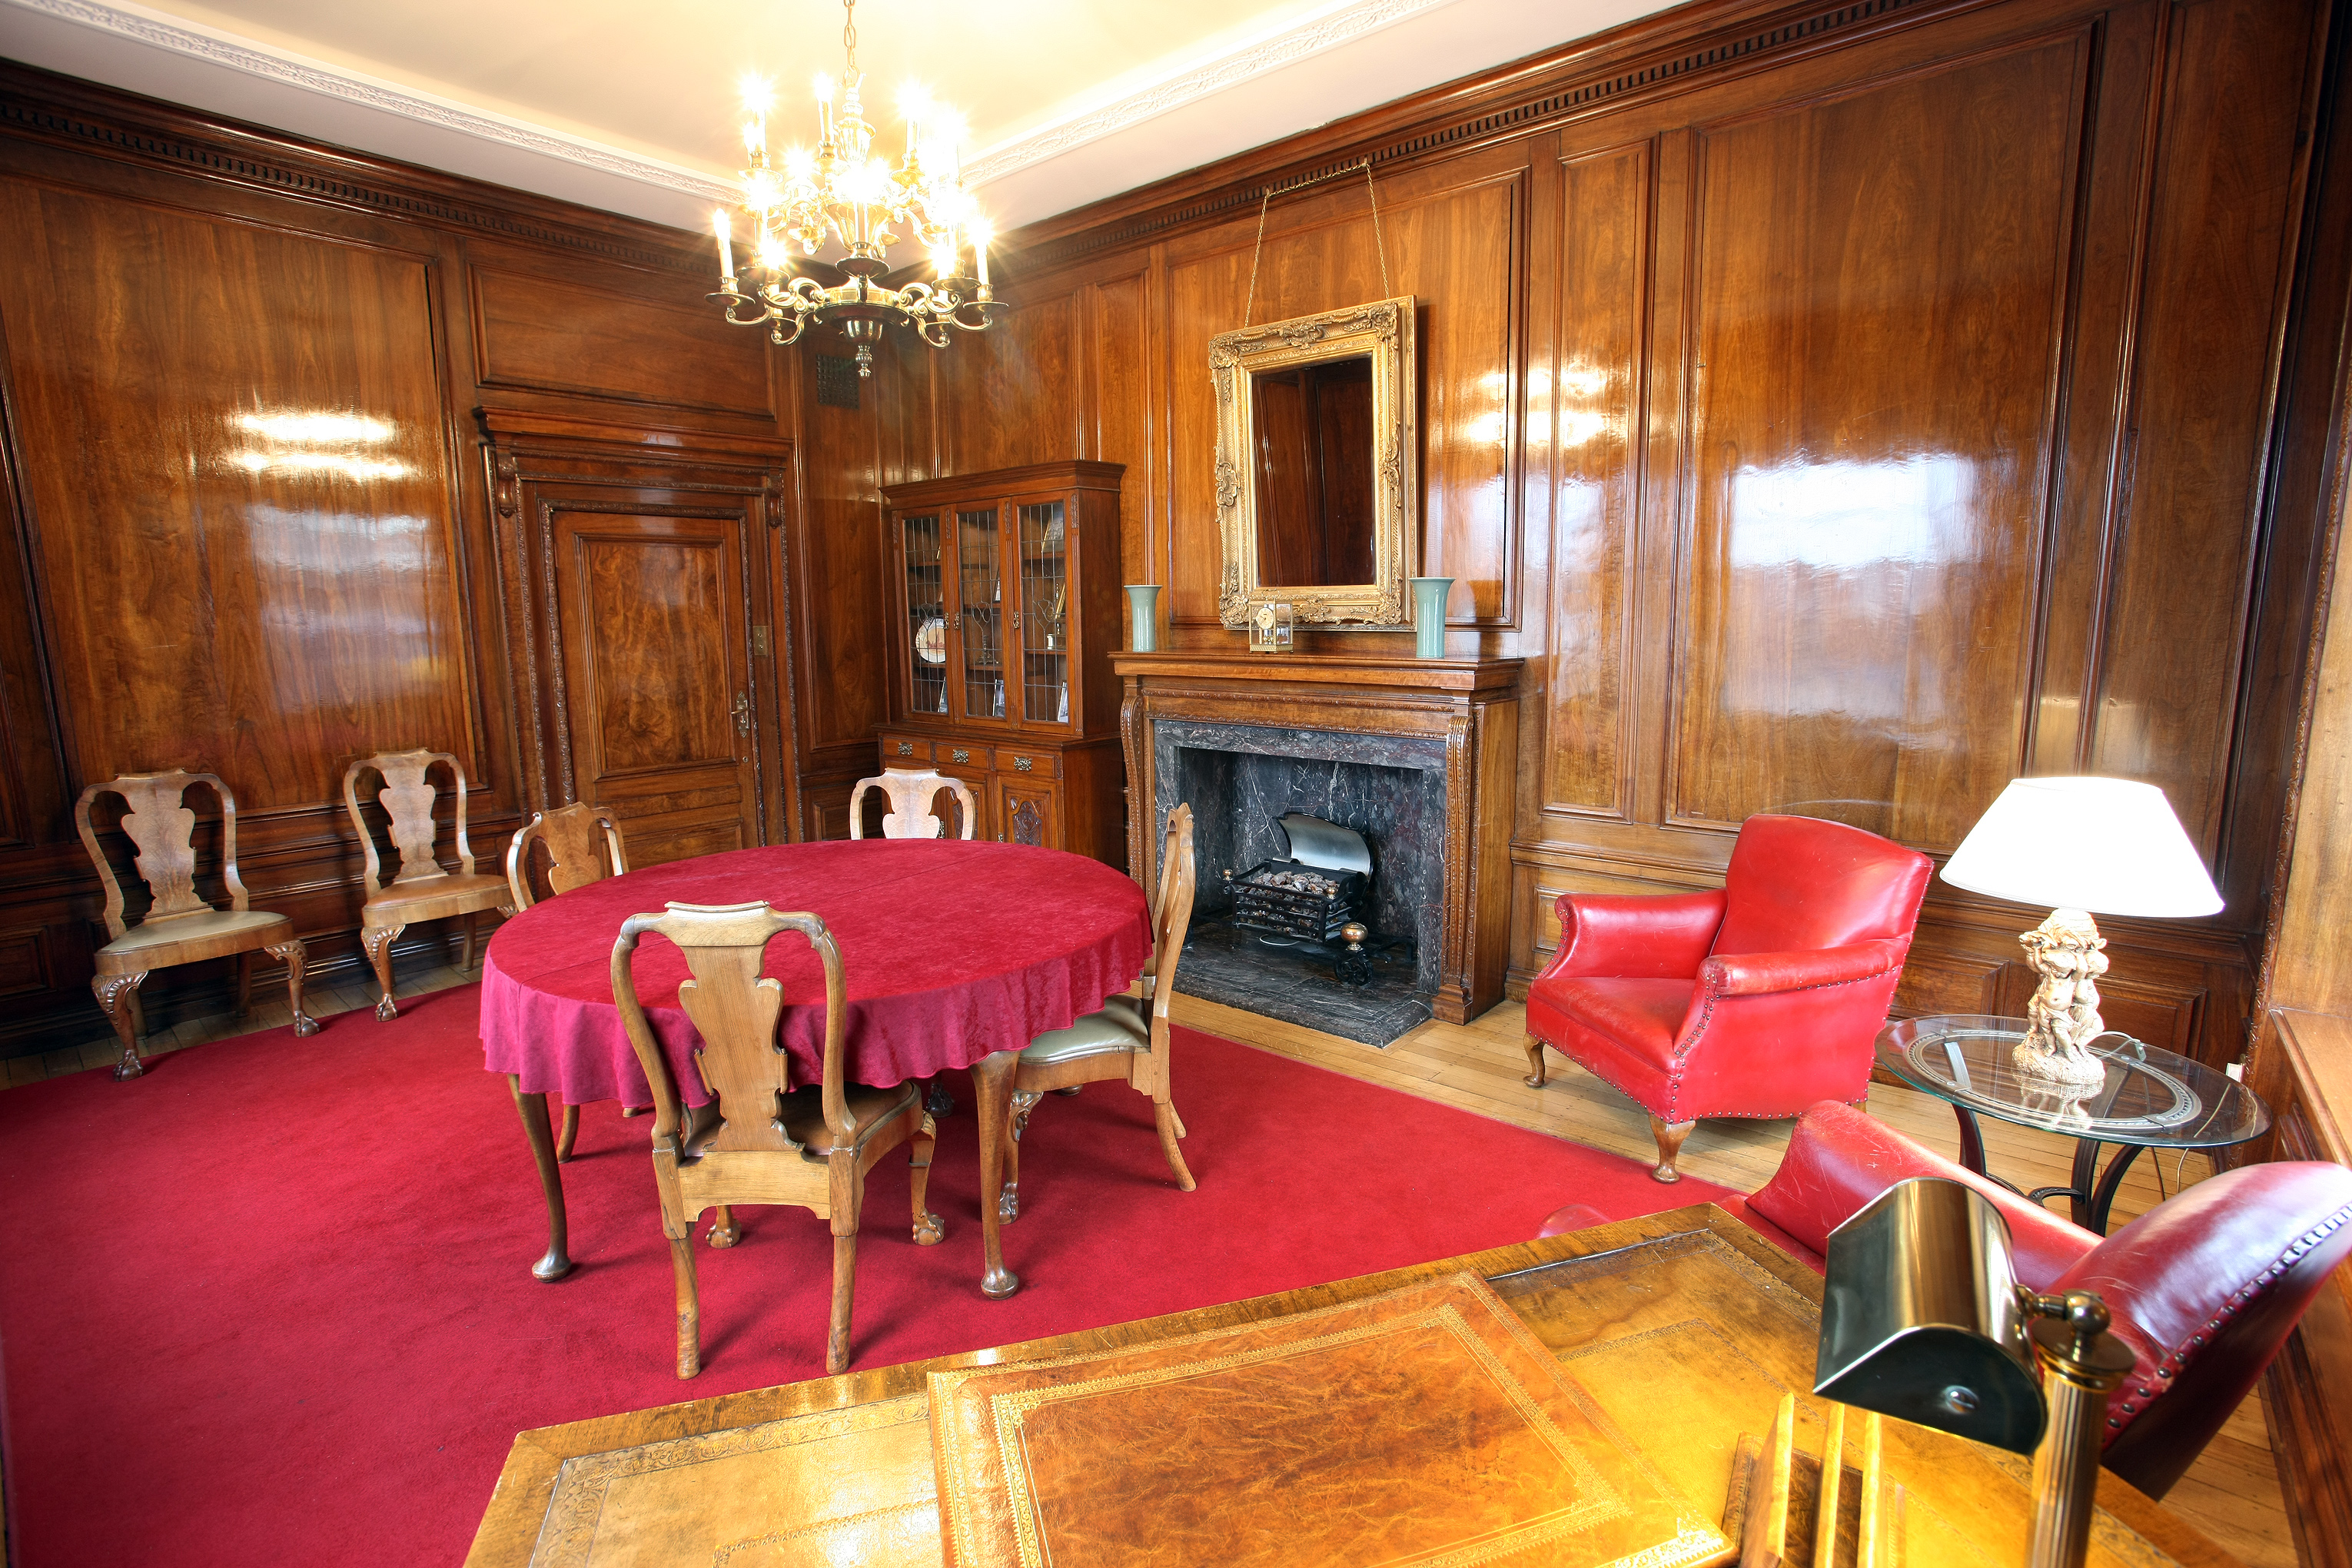 north committee room and the town hall